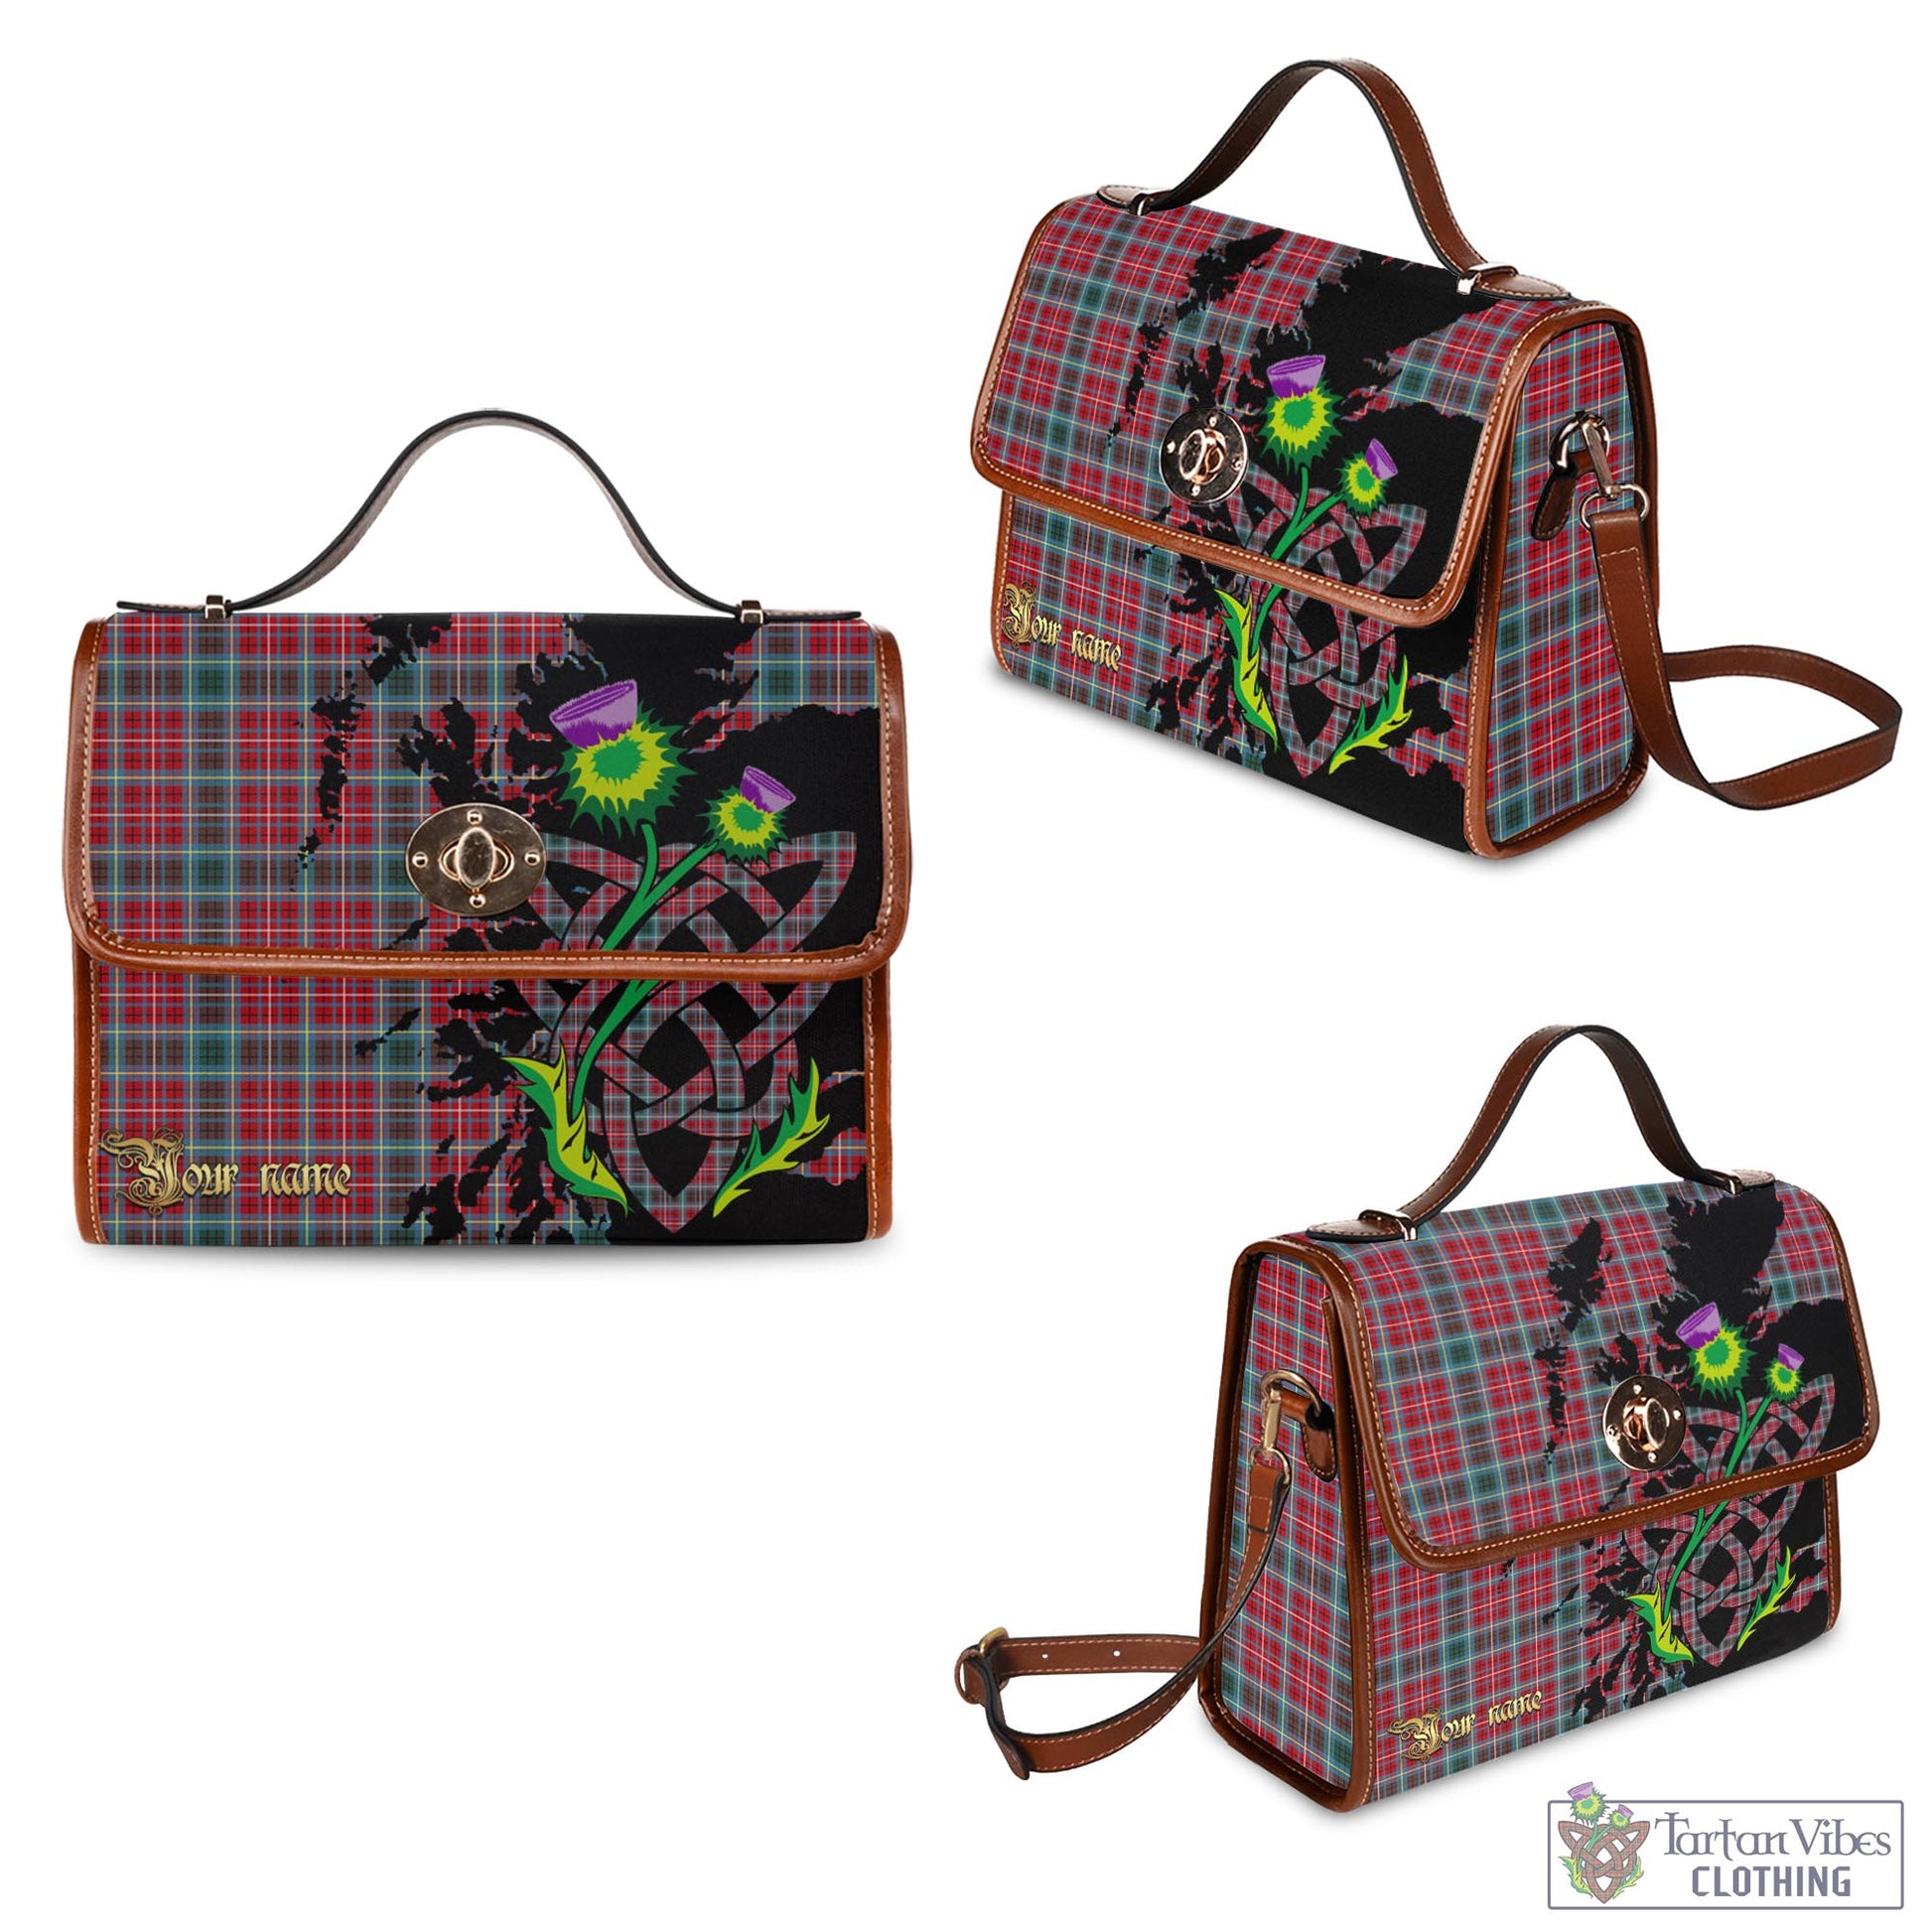 Tartan Vibes Clothing British Columbia Province Canada Tartan Waterproof Canvas Bag with Scotland Map and Thistle Celtic Accents